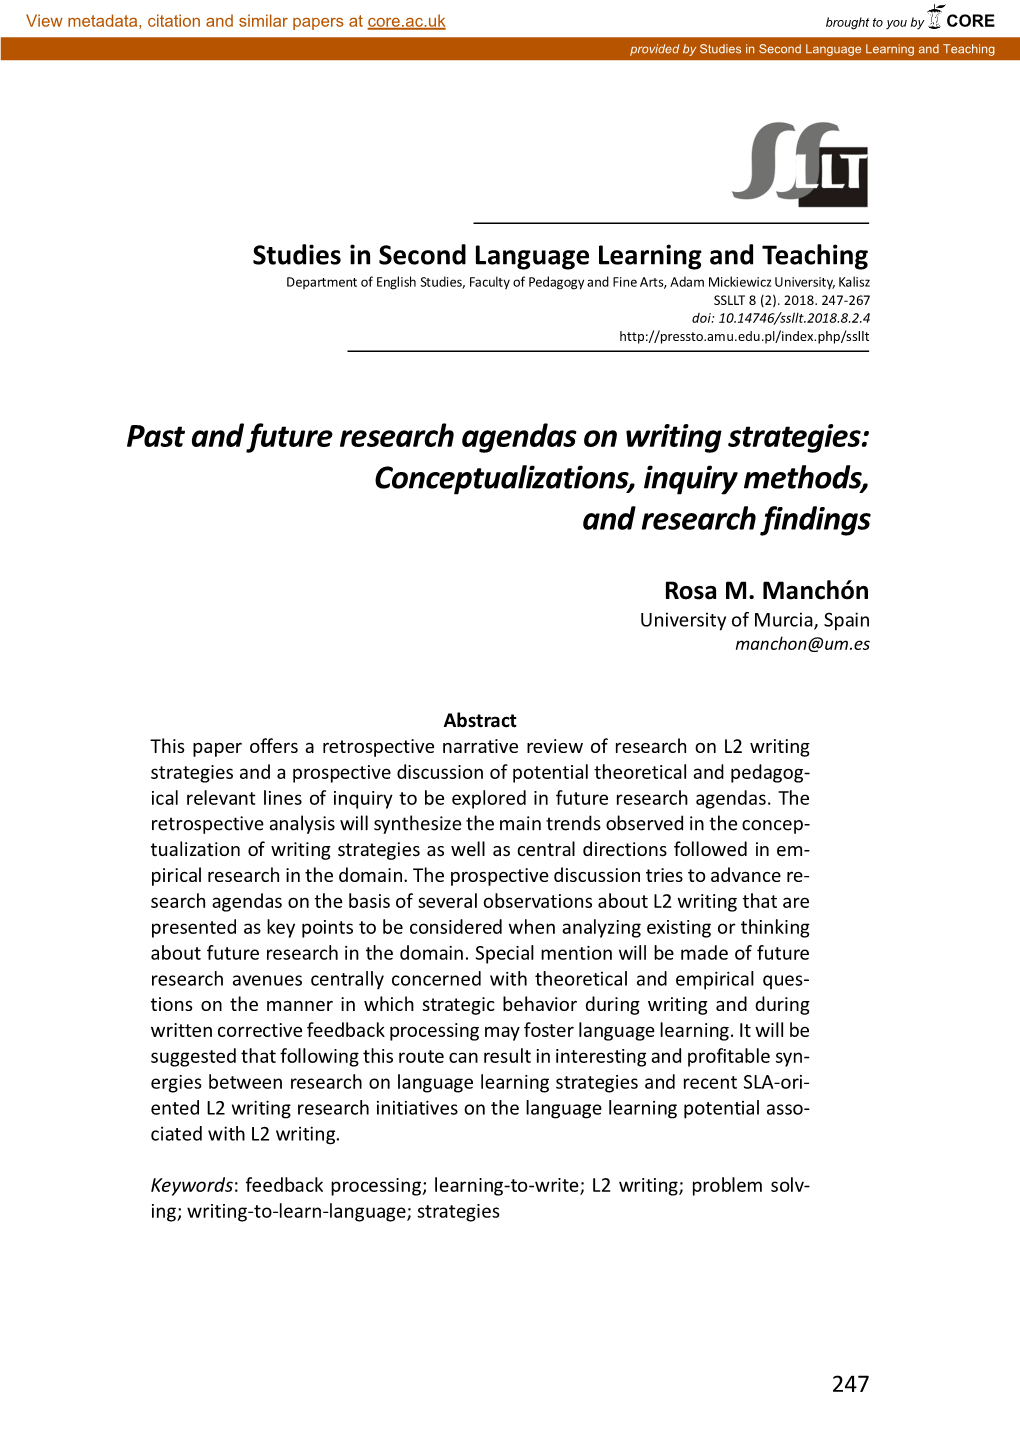 Past and Future Research Agendas on Writing Strategies: Conceptualizations, Inquiry Methods, and Research Findings